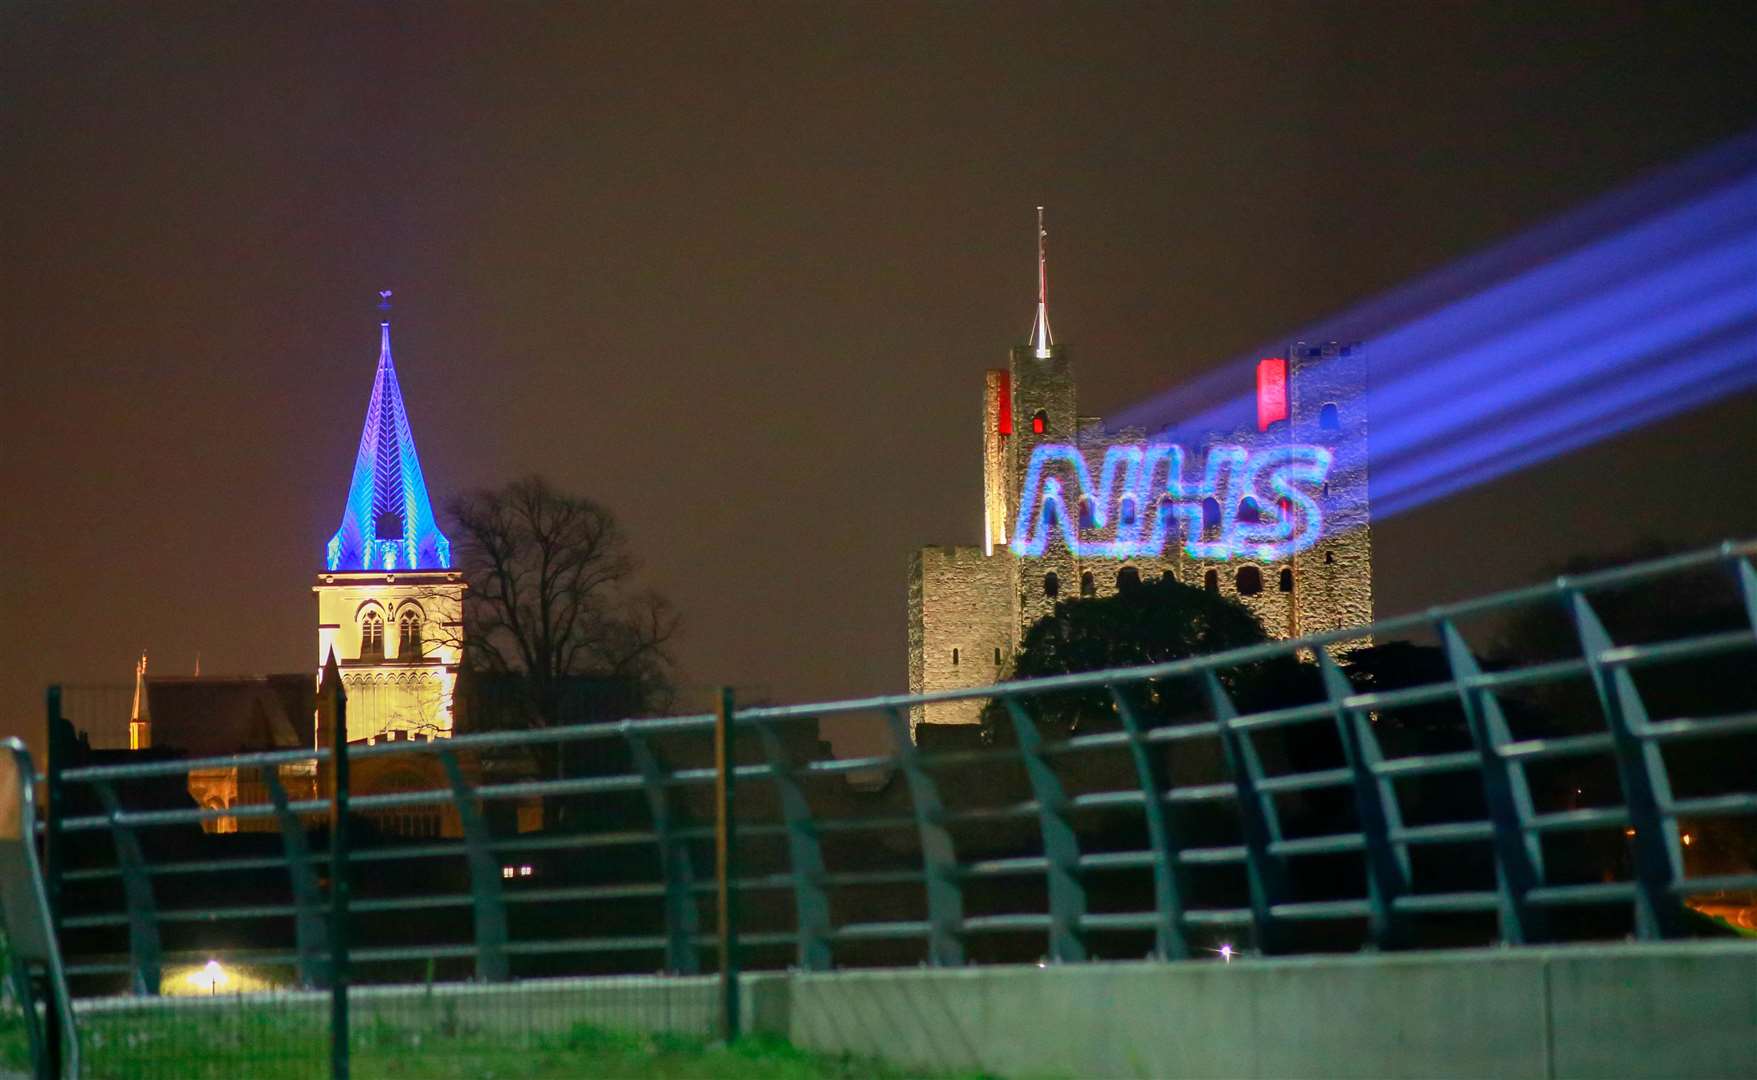 The NHS logo is also beamed onto the side of Rochester Catherdral